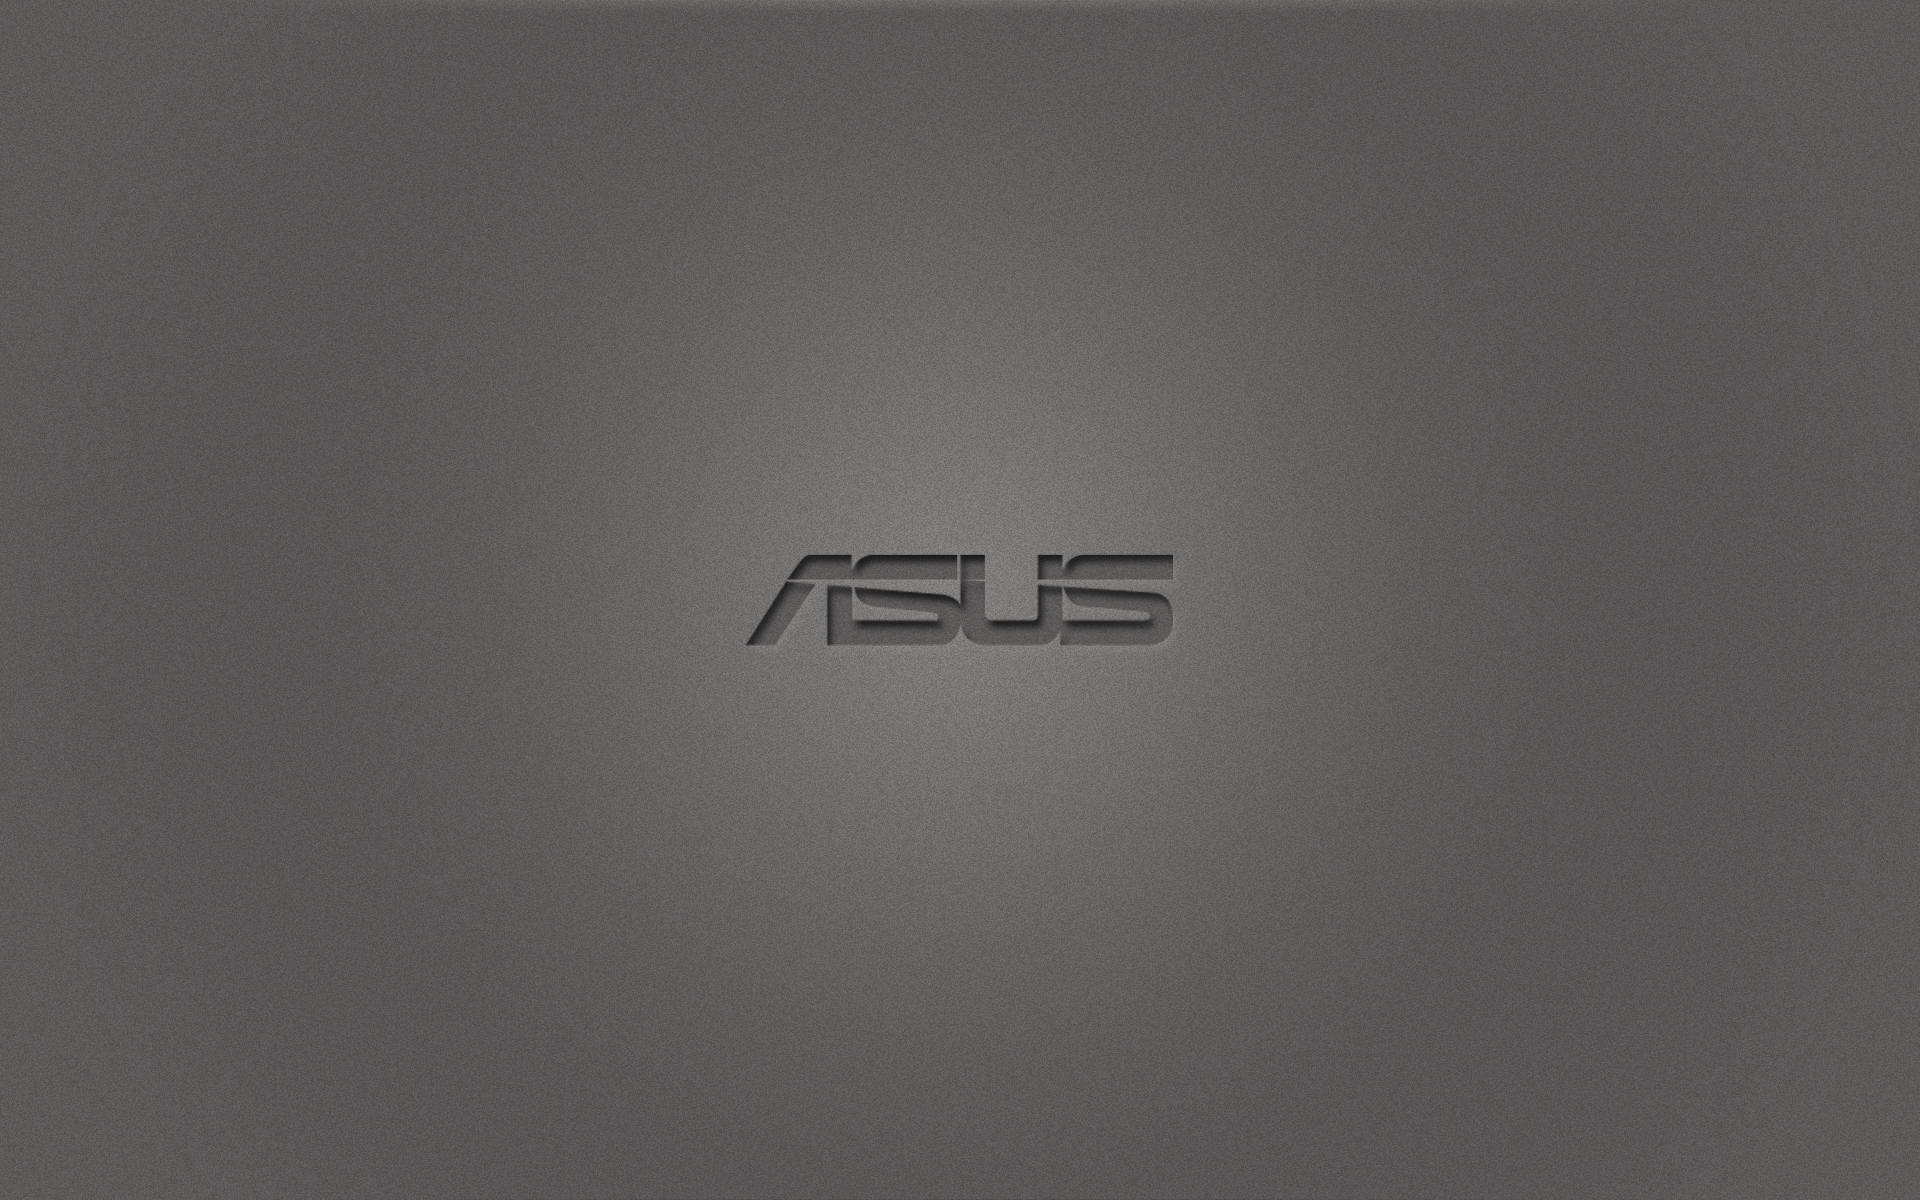 80 Asus HD Wallpapers | Backgrounds - Wallpaper Abyss - Page 3